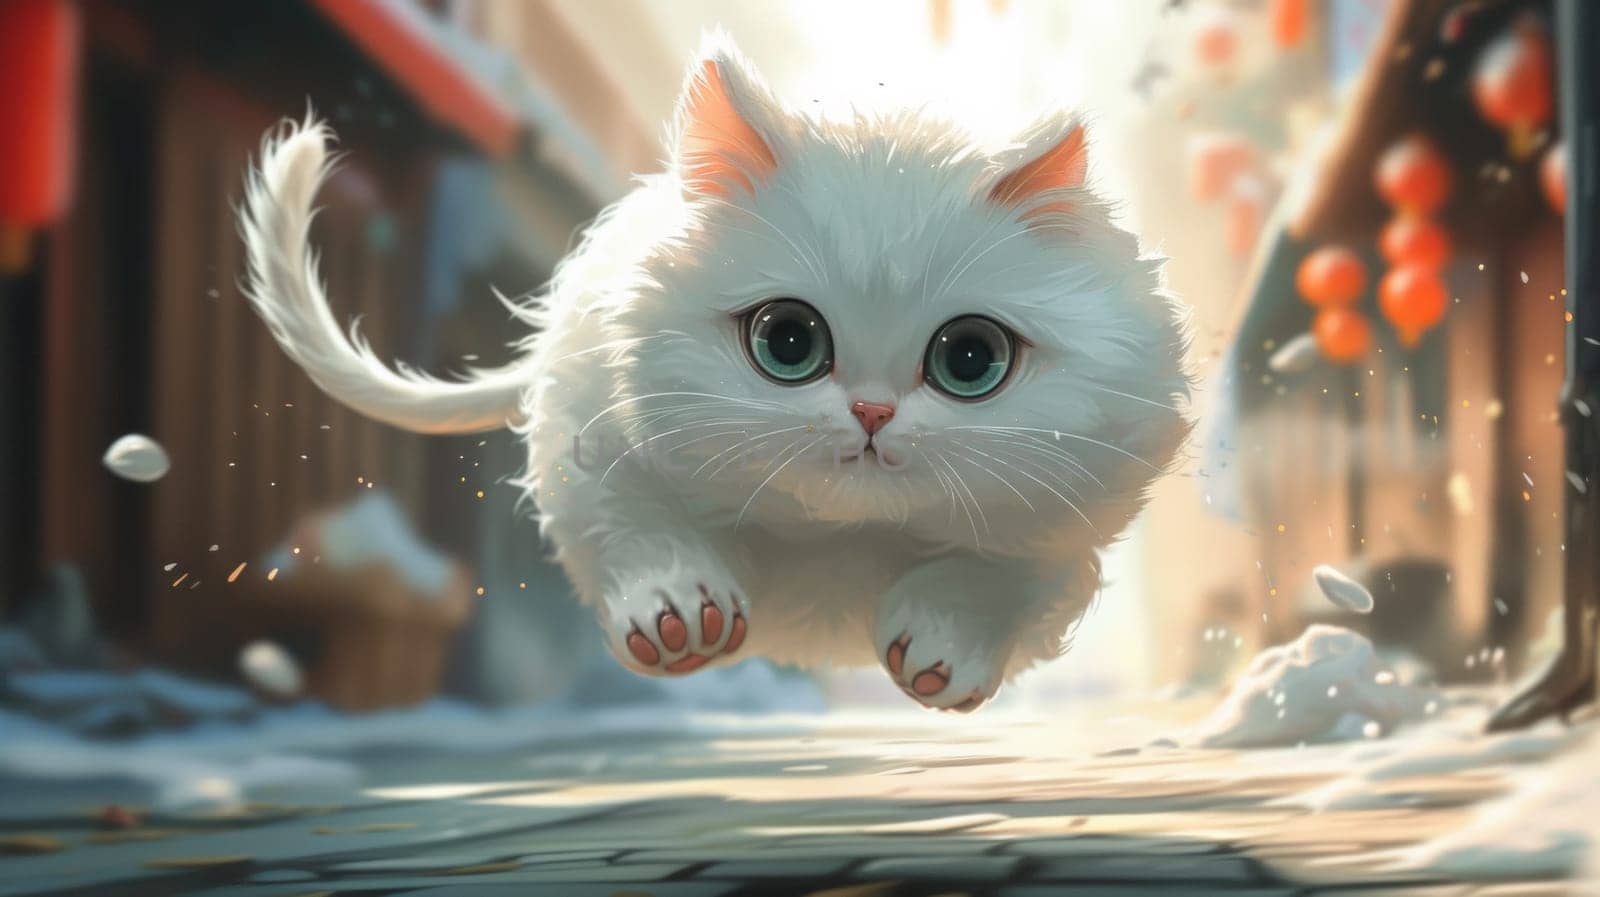 A white cat with big eyes flying through the air